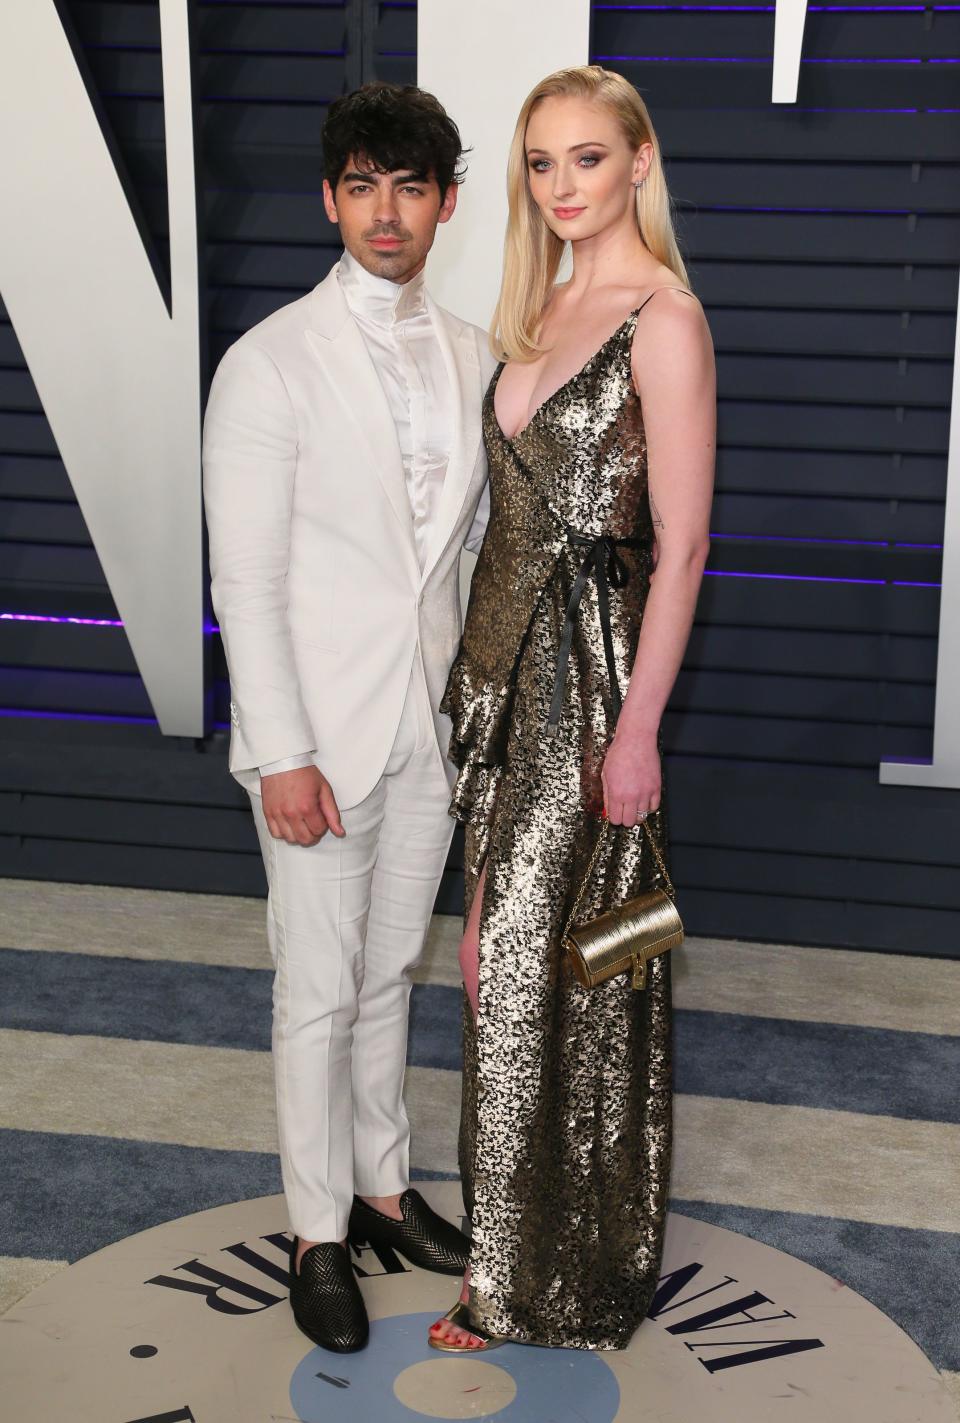 Joe Jonas and Sophie Turner at the Vanity Fair Oscars 2019 after party